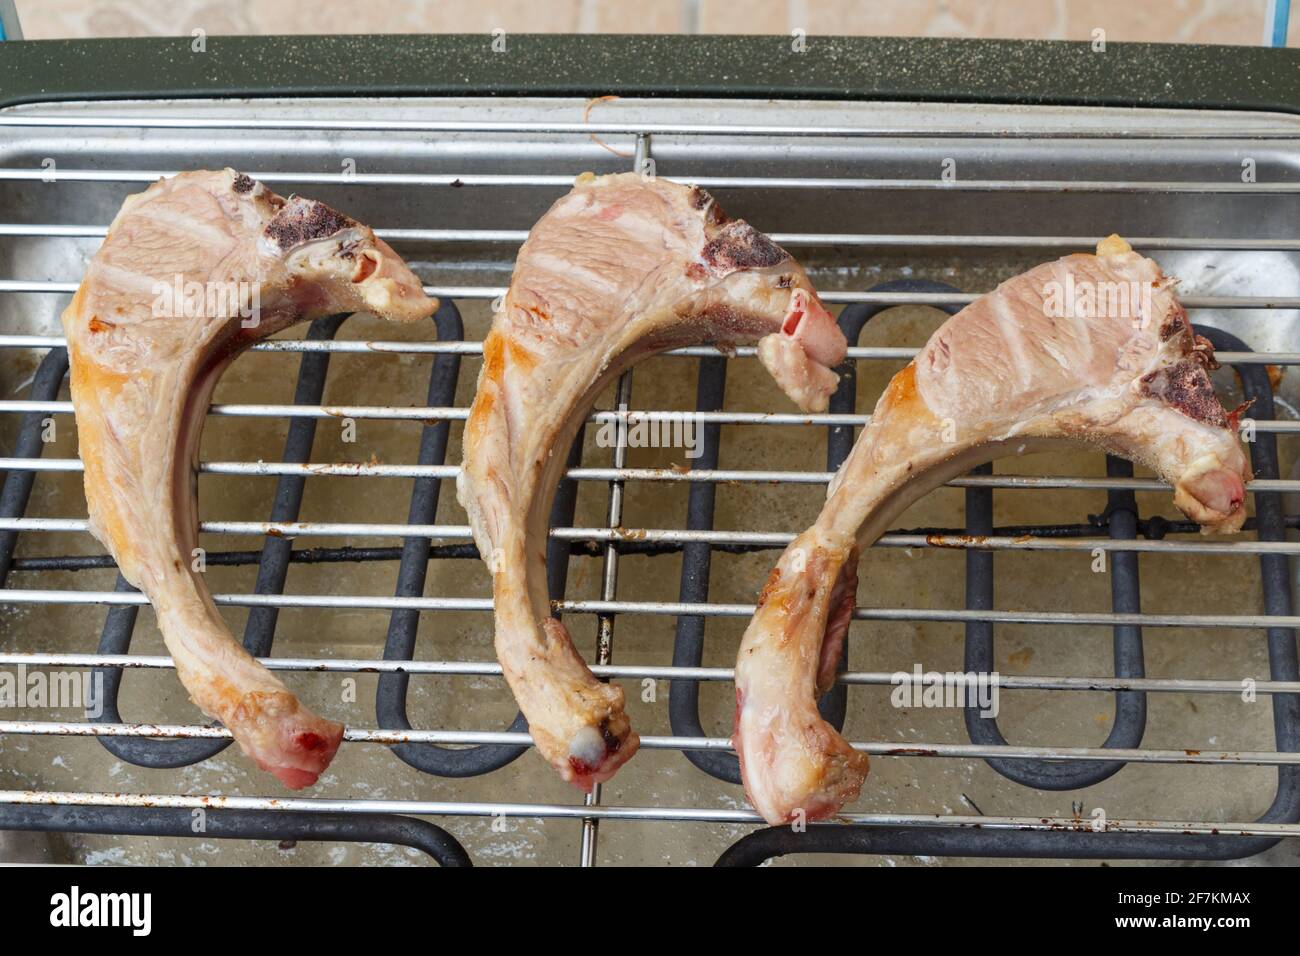 Lamb chops on the grid of an electric barbecue Stock Photo